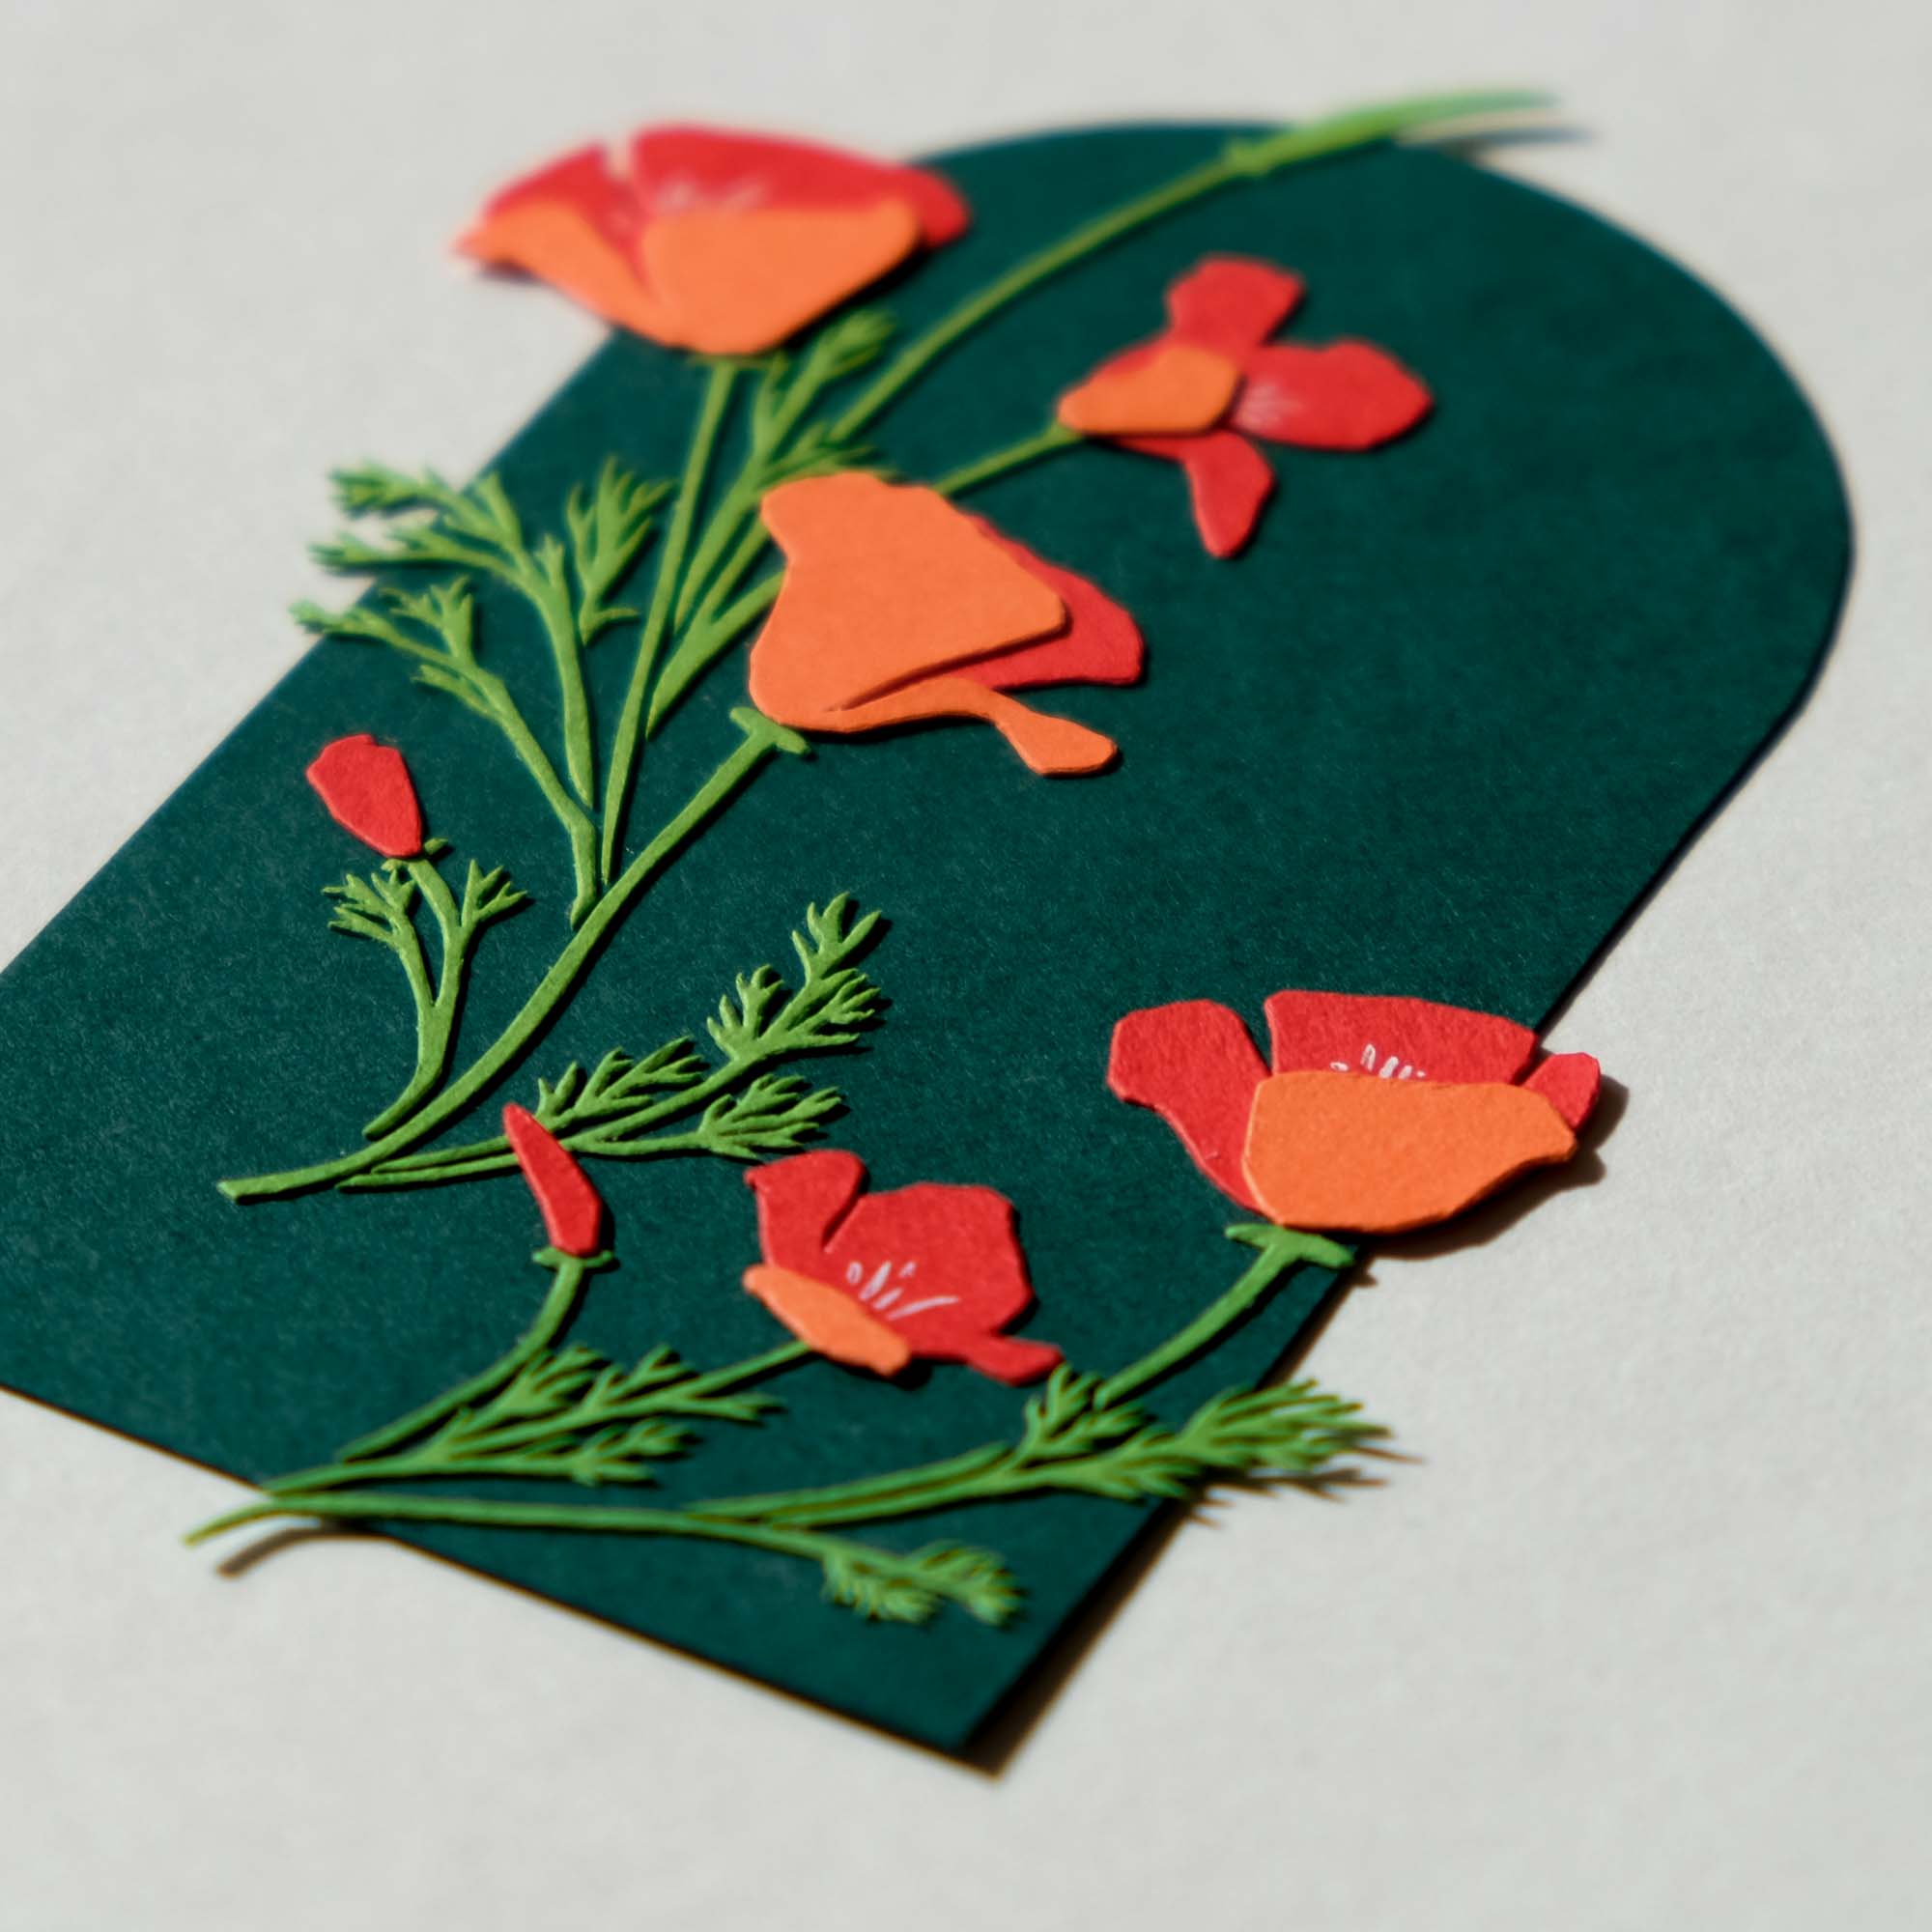 A close-up of the paper California poppies shows the details of the flowers and the leaves.